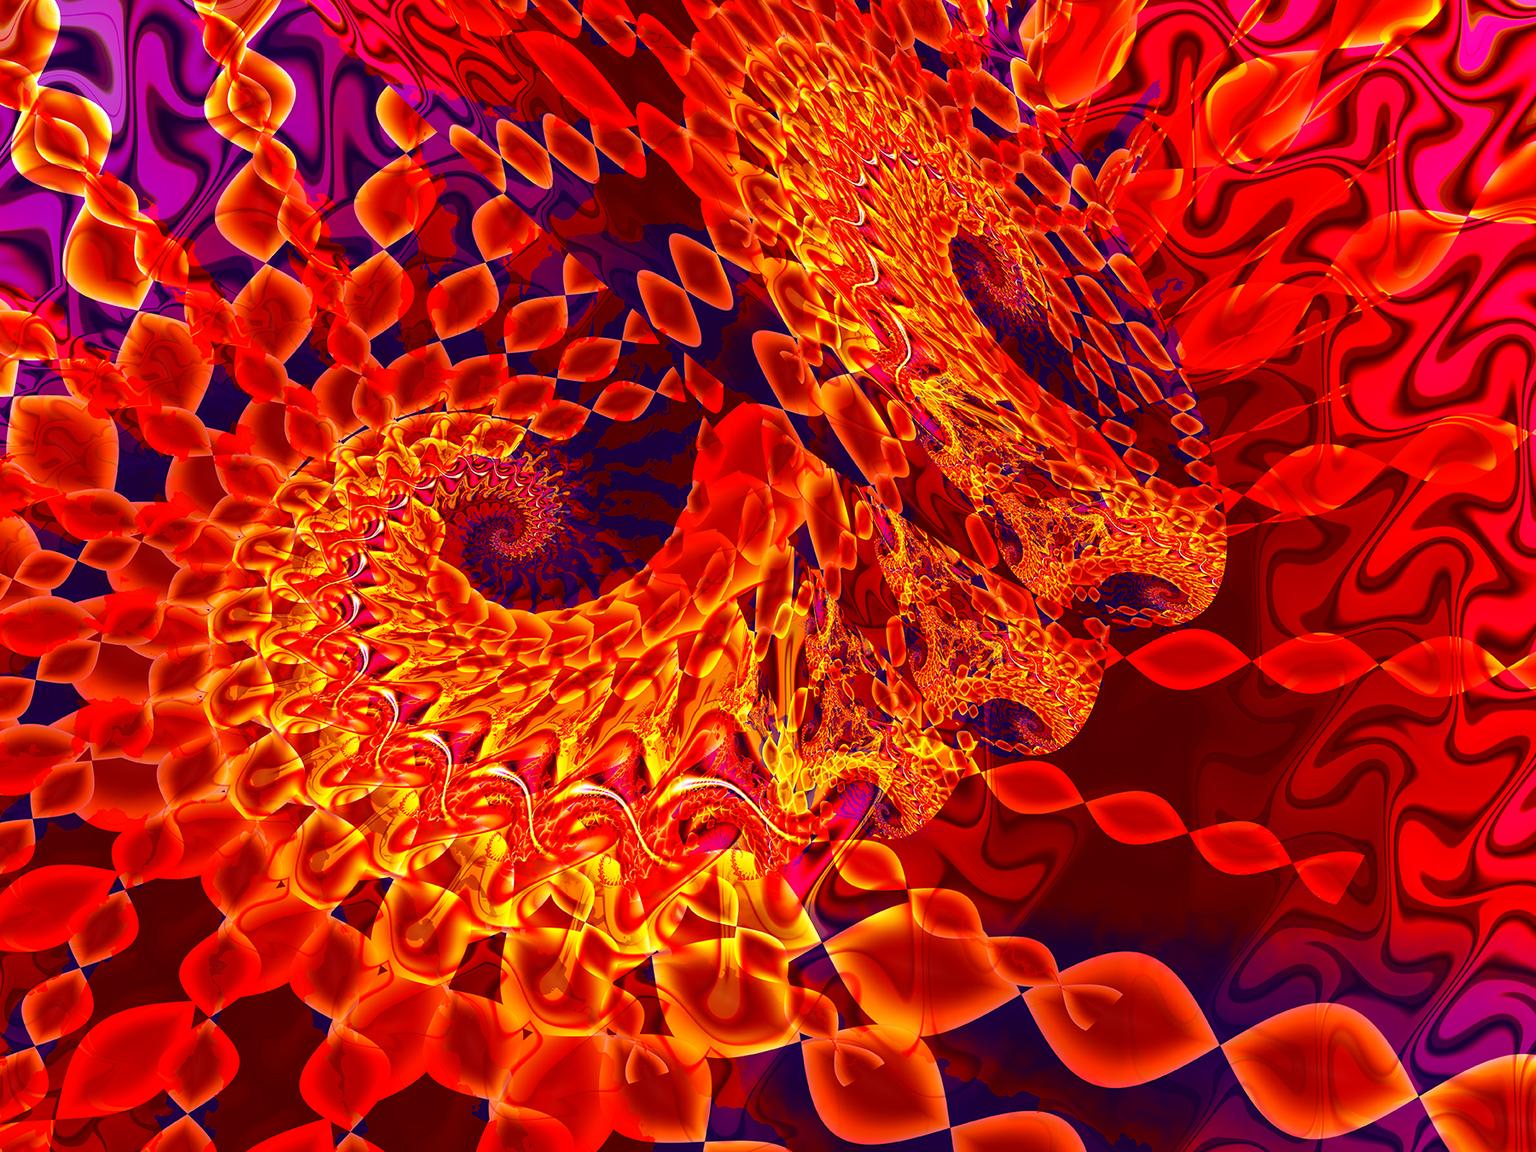 Image for entry 'Igneous ~ Dragon Dance'